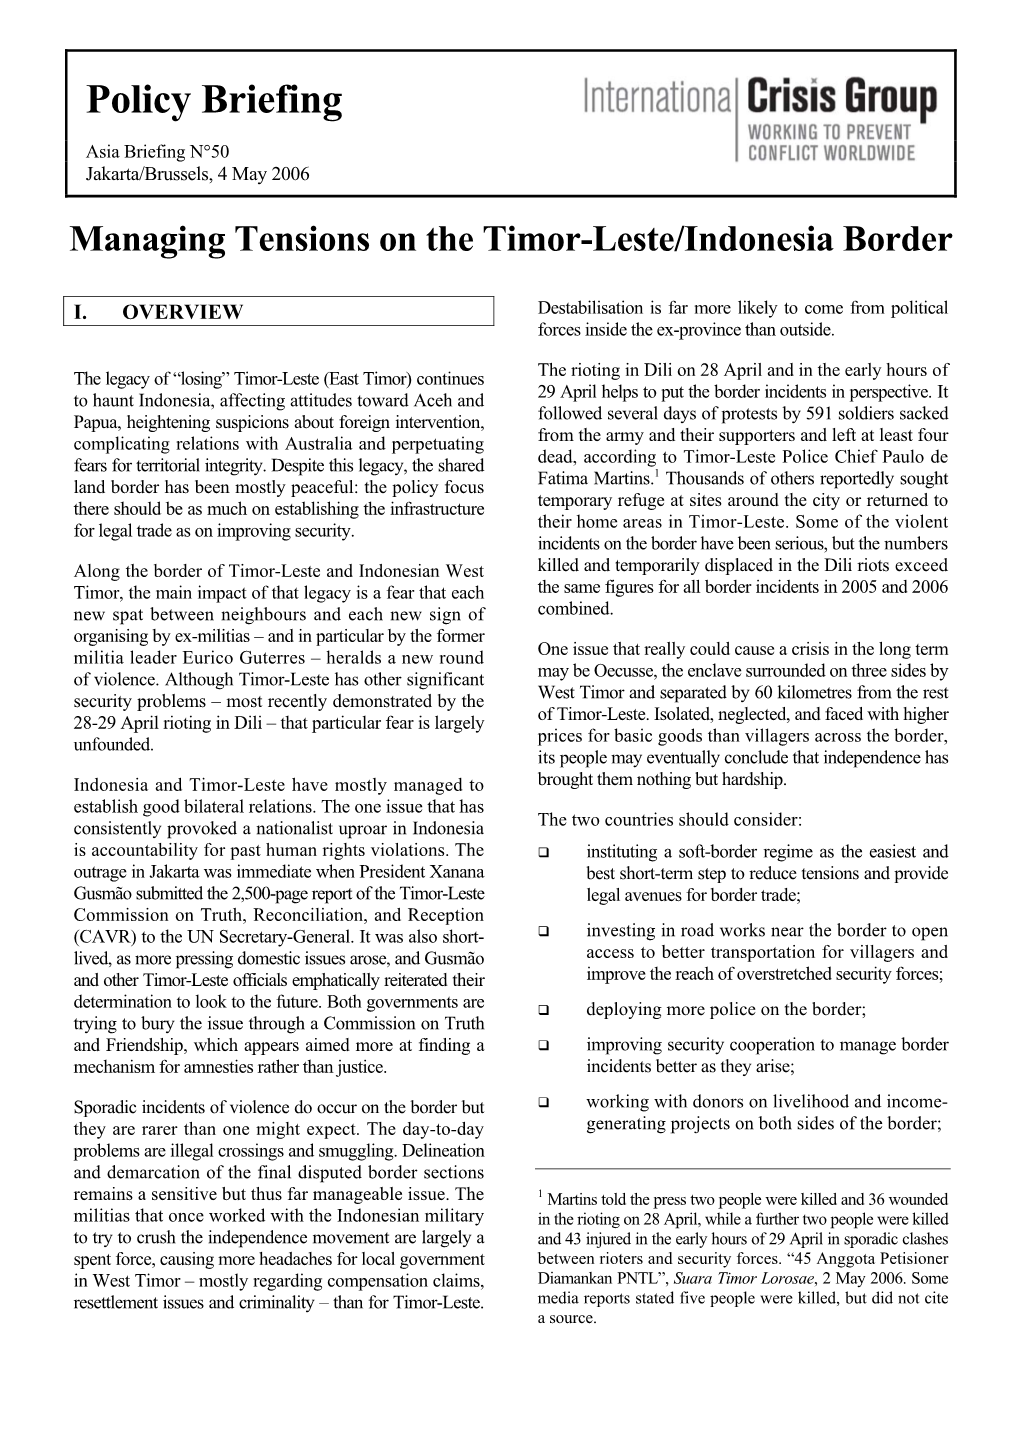 Asia Briefing, Nr. 50: Managing Tensions on the Timor-Leste/Indonesia Border